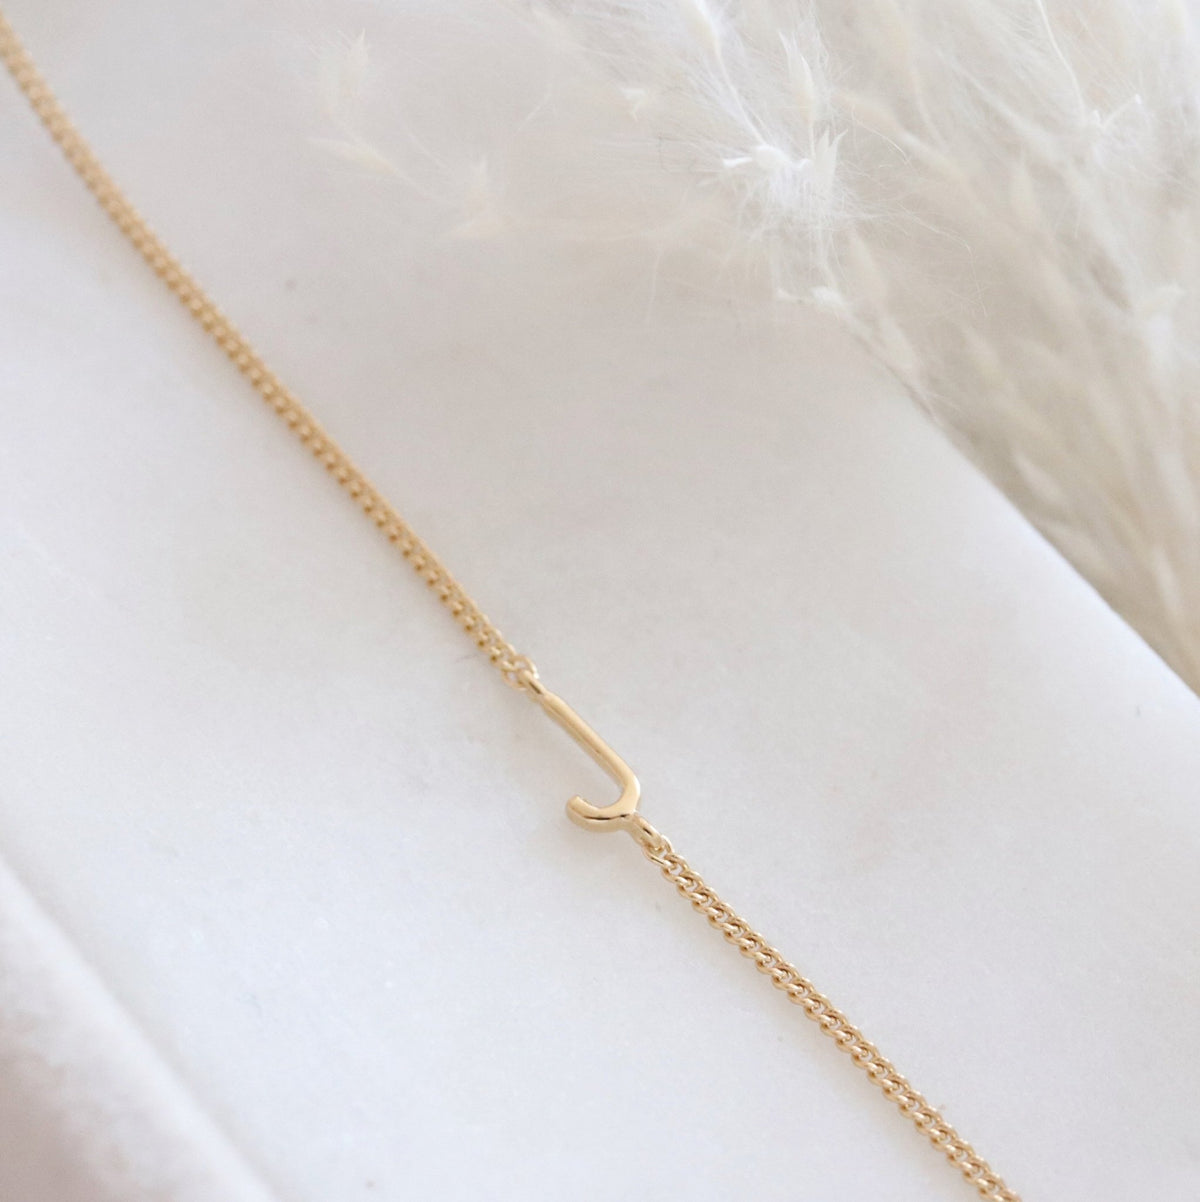 NOTABLE OFFSET INITIAL NECKLACE - J - GOLD - SO PRETTY CARA COTTER